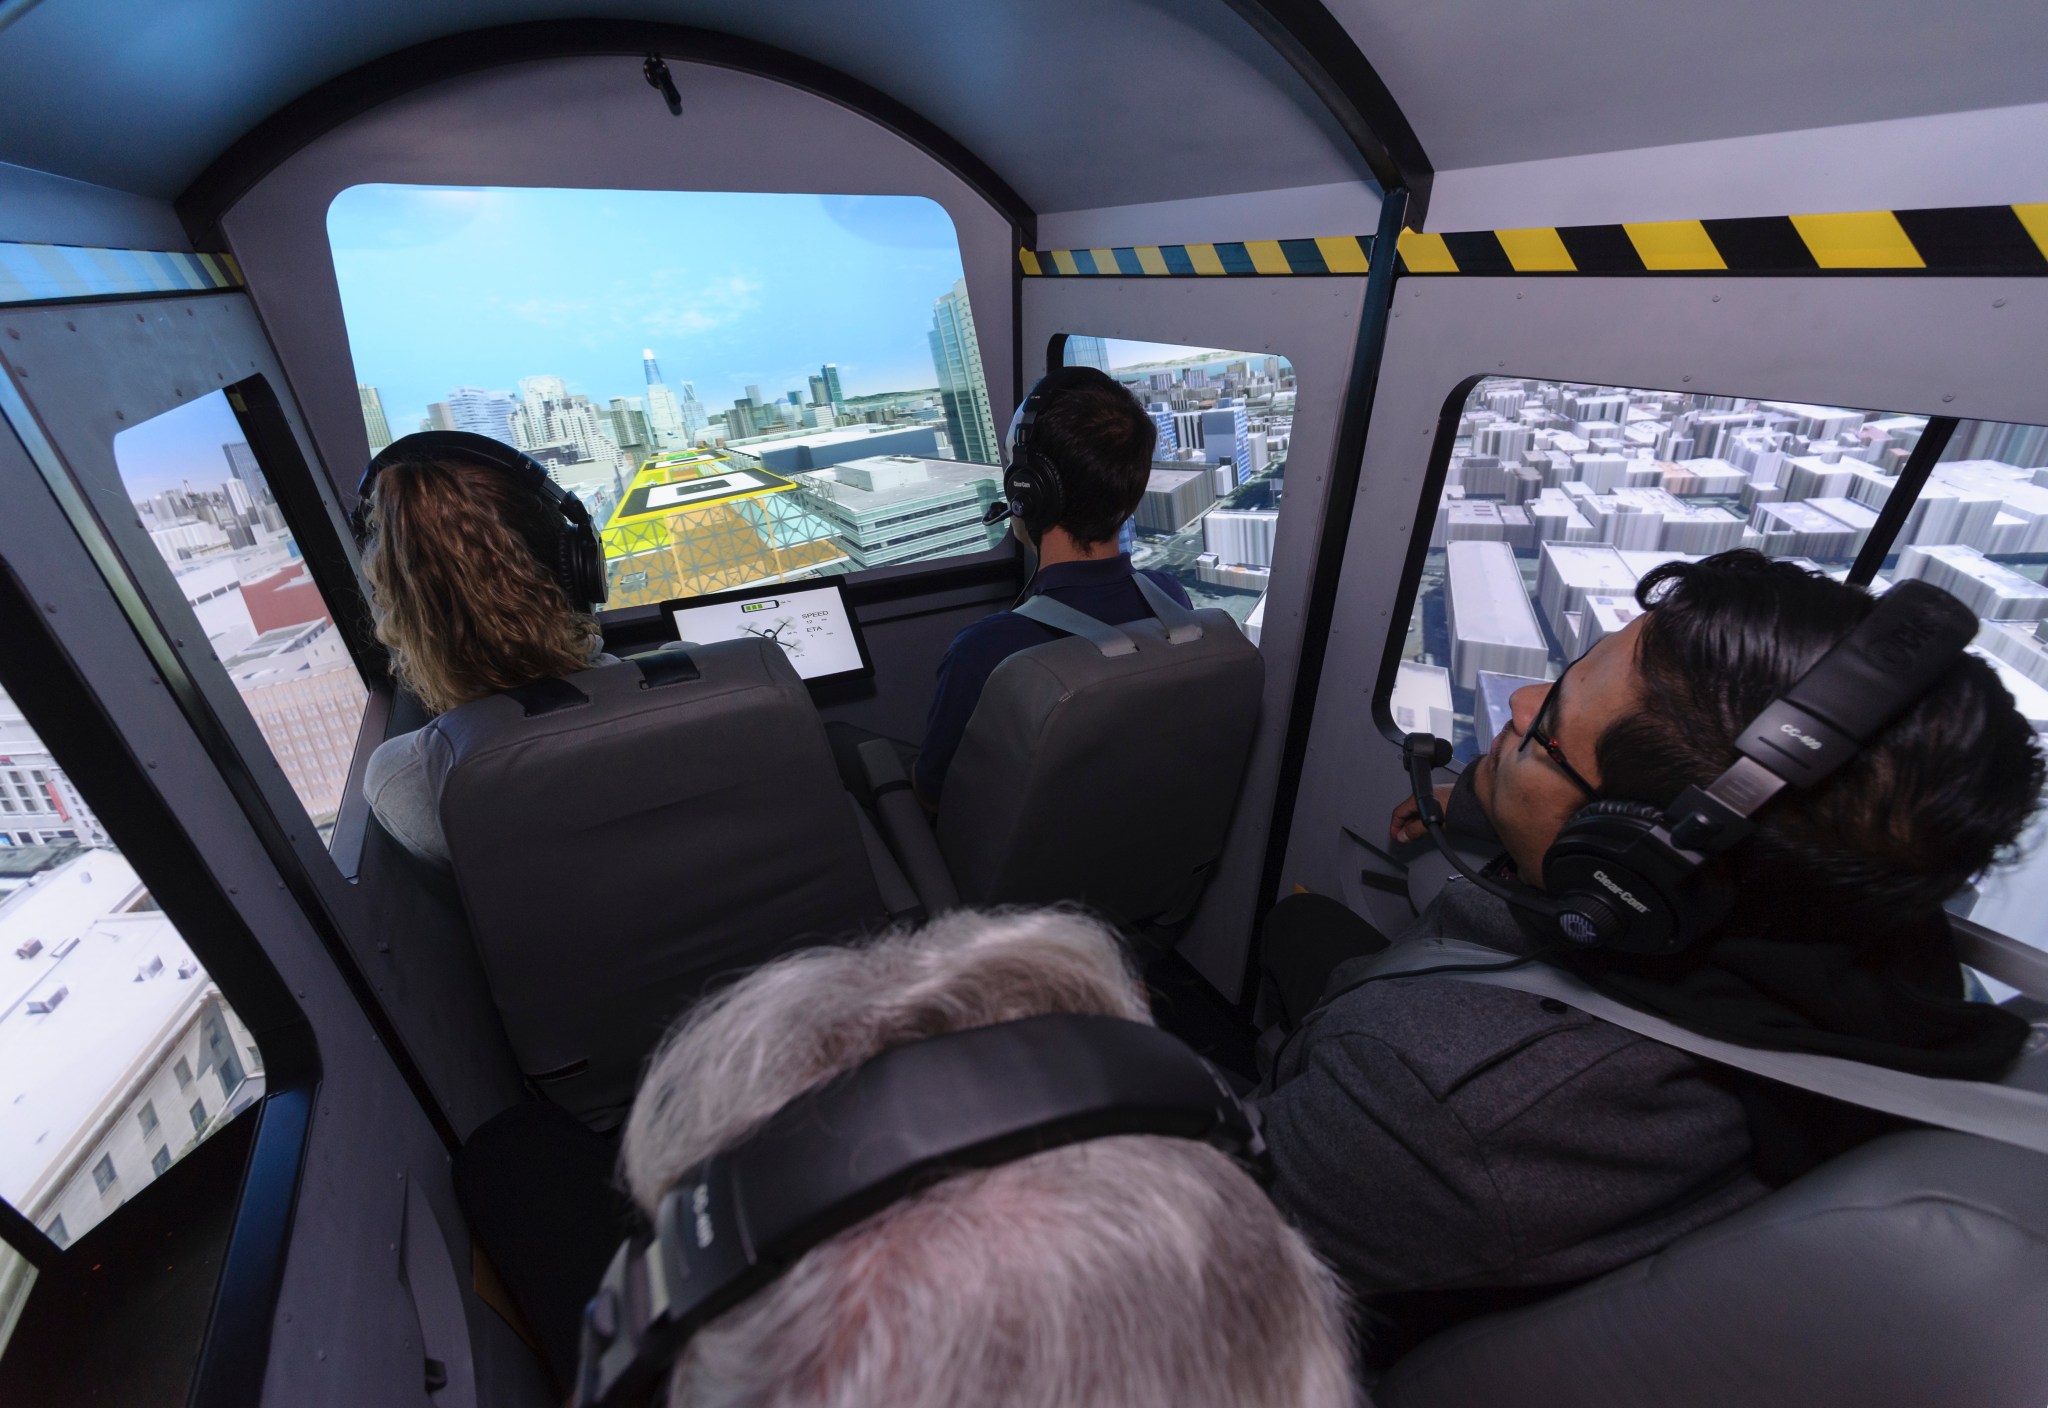 Air taxi demonstration participants looking at screens showing vertiport configuration